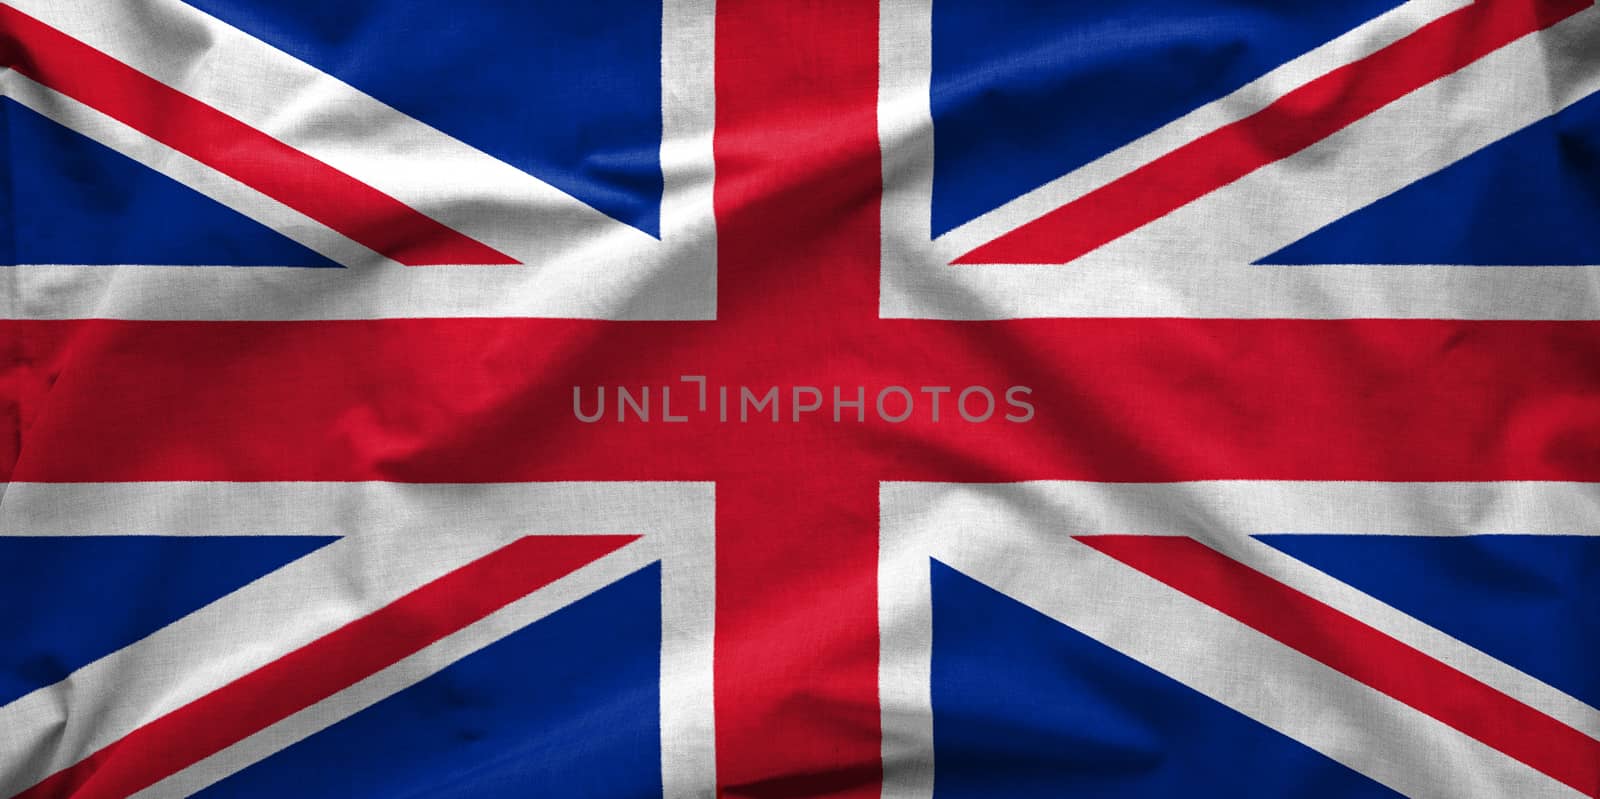 Union Jack wide silk flag of The United Kingdom of Great Britain and Northern Ireland blowing in the wind in full frame background concept